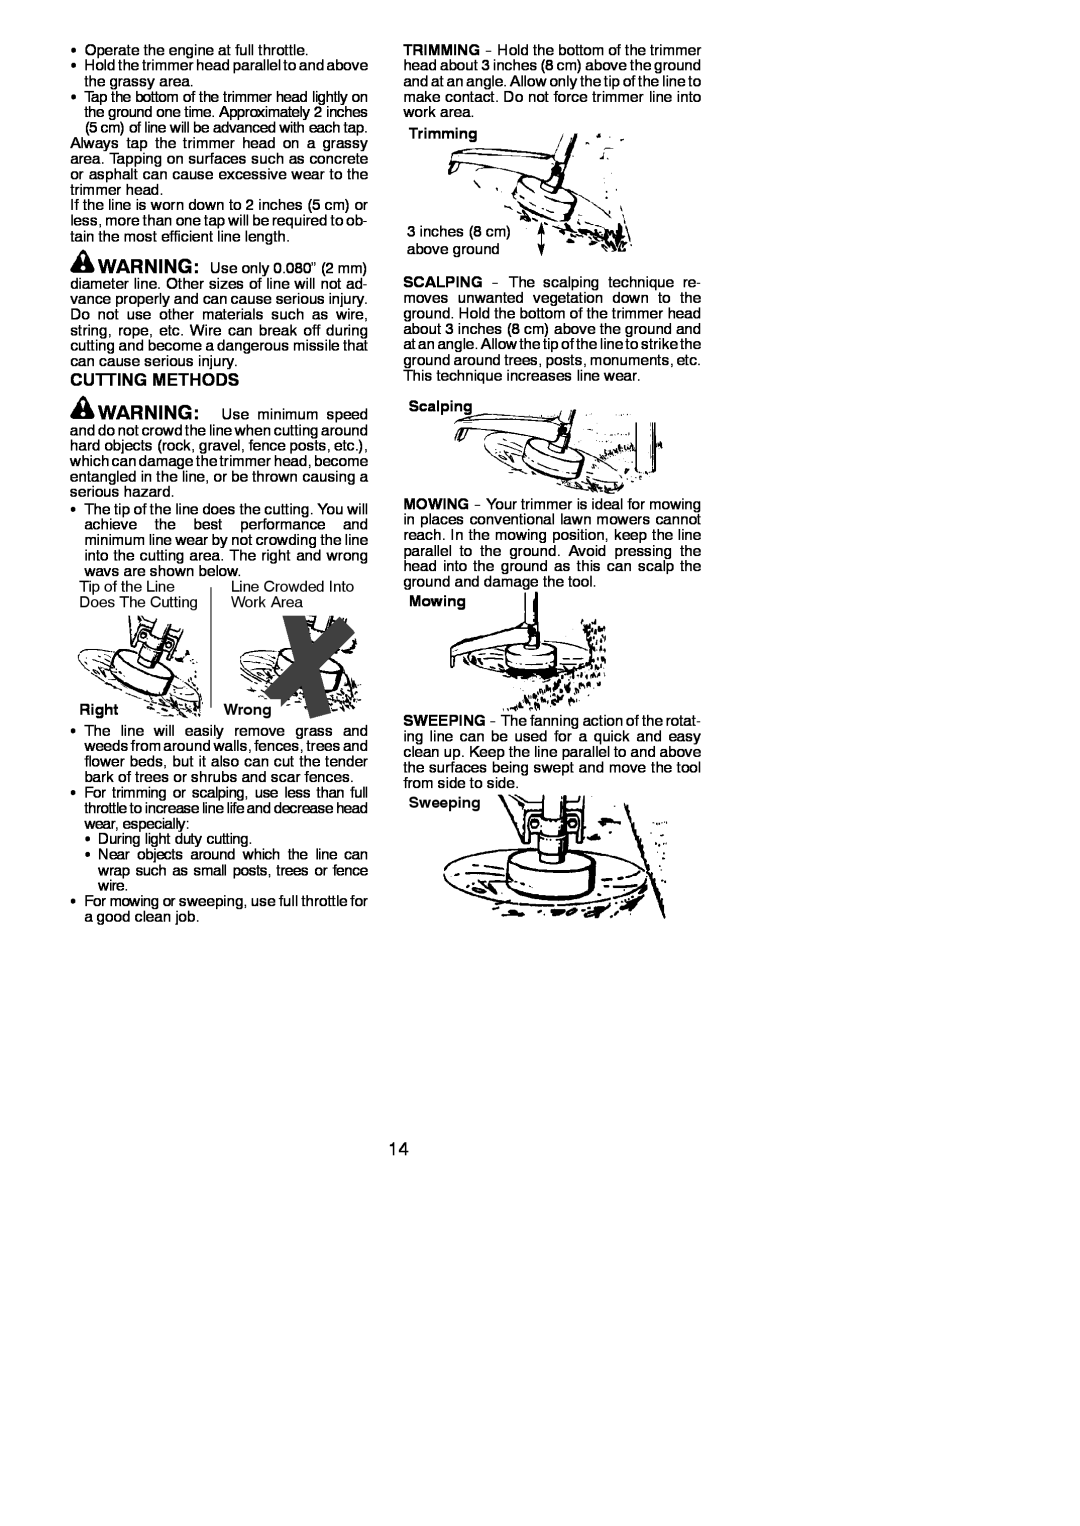 Poulan 952711882, PP46ET instruction manual Cutting Methods, Trimming, Scalping, Right, Wrong, Mowing, Sweeping 